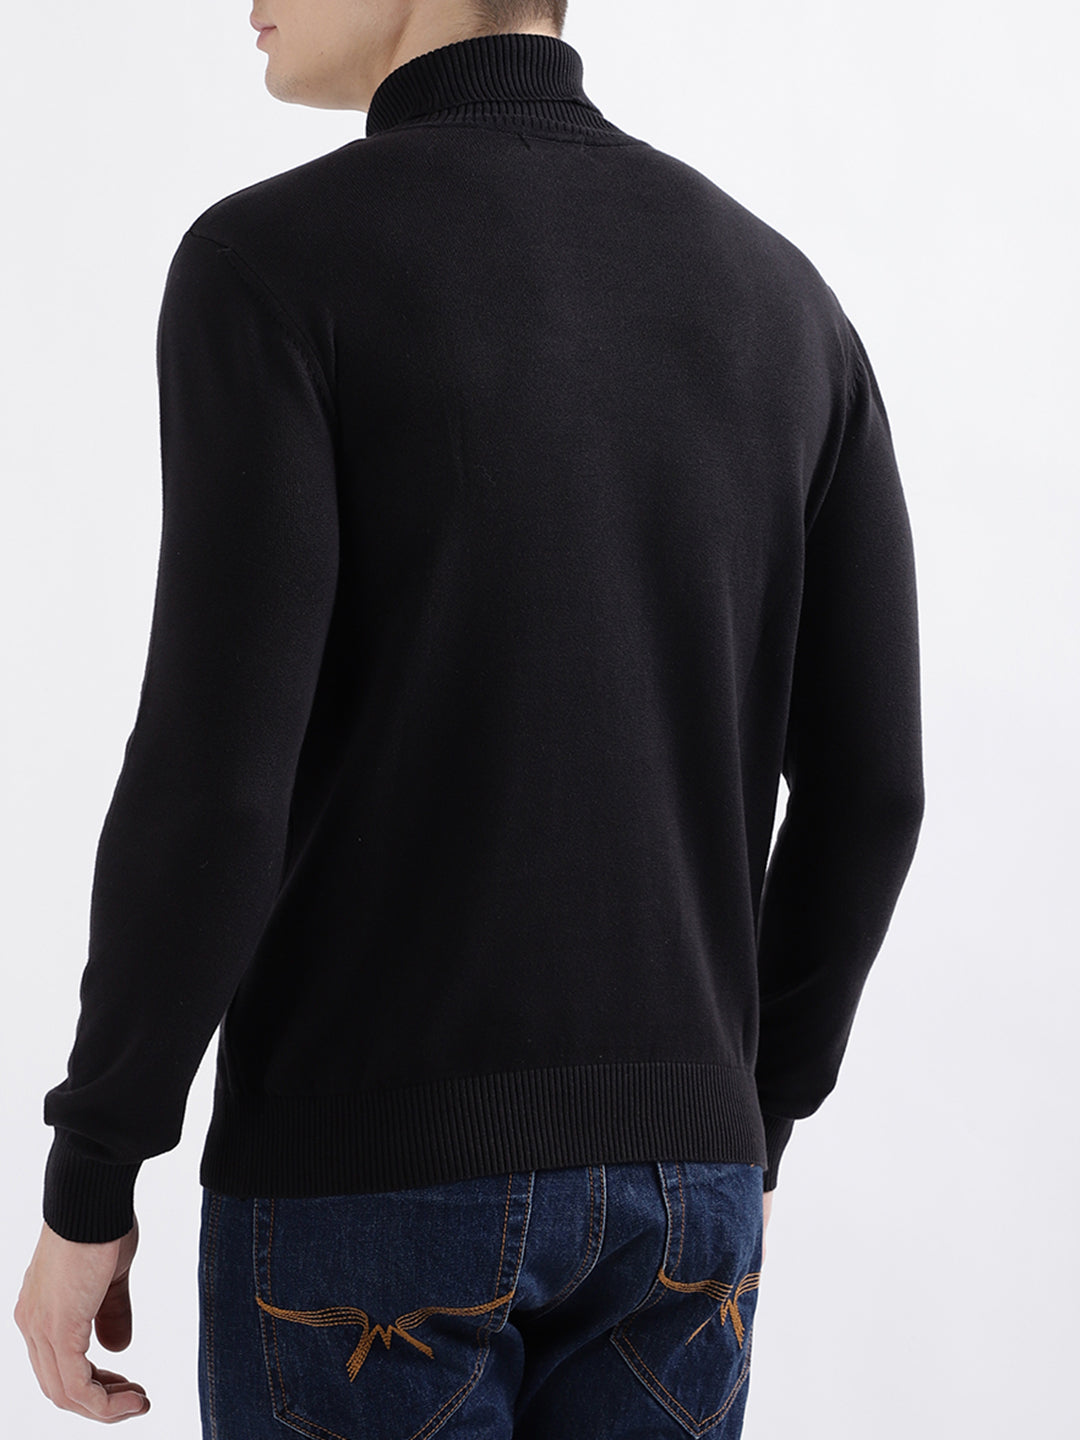 Iconic Men Black Solid Full Sleeves Turtle Neck Sweater